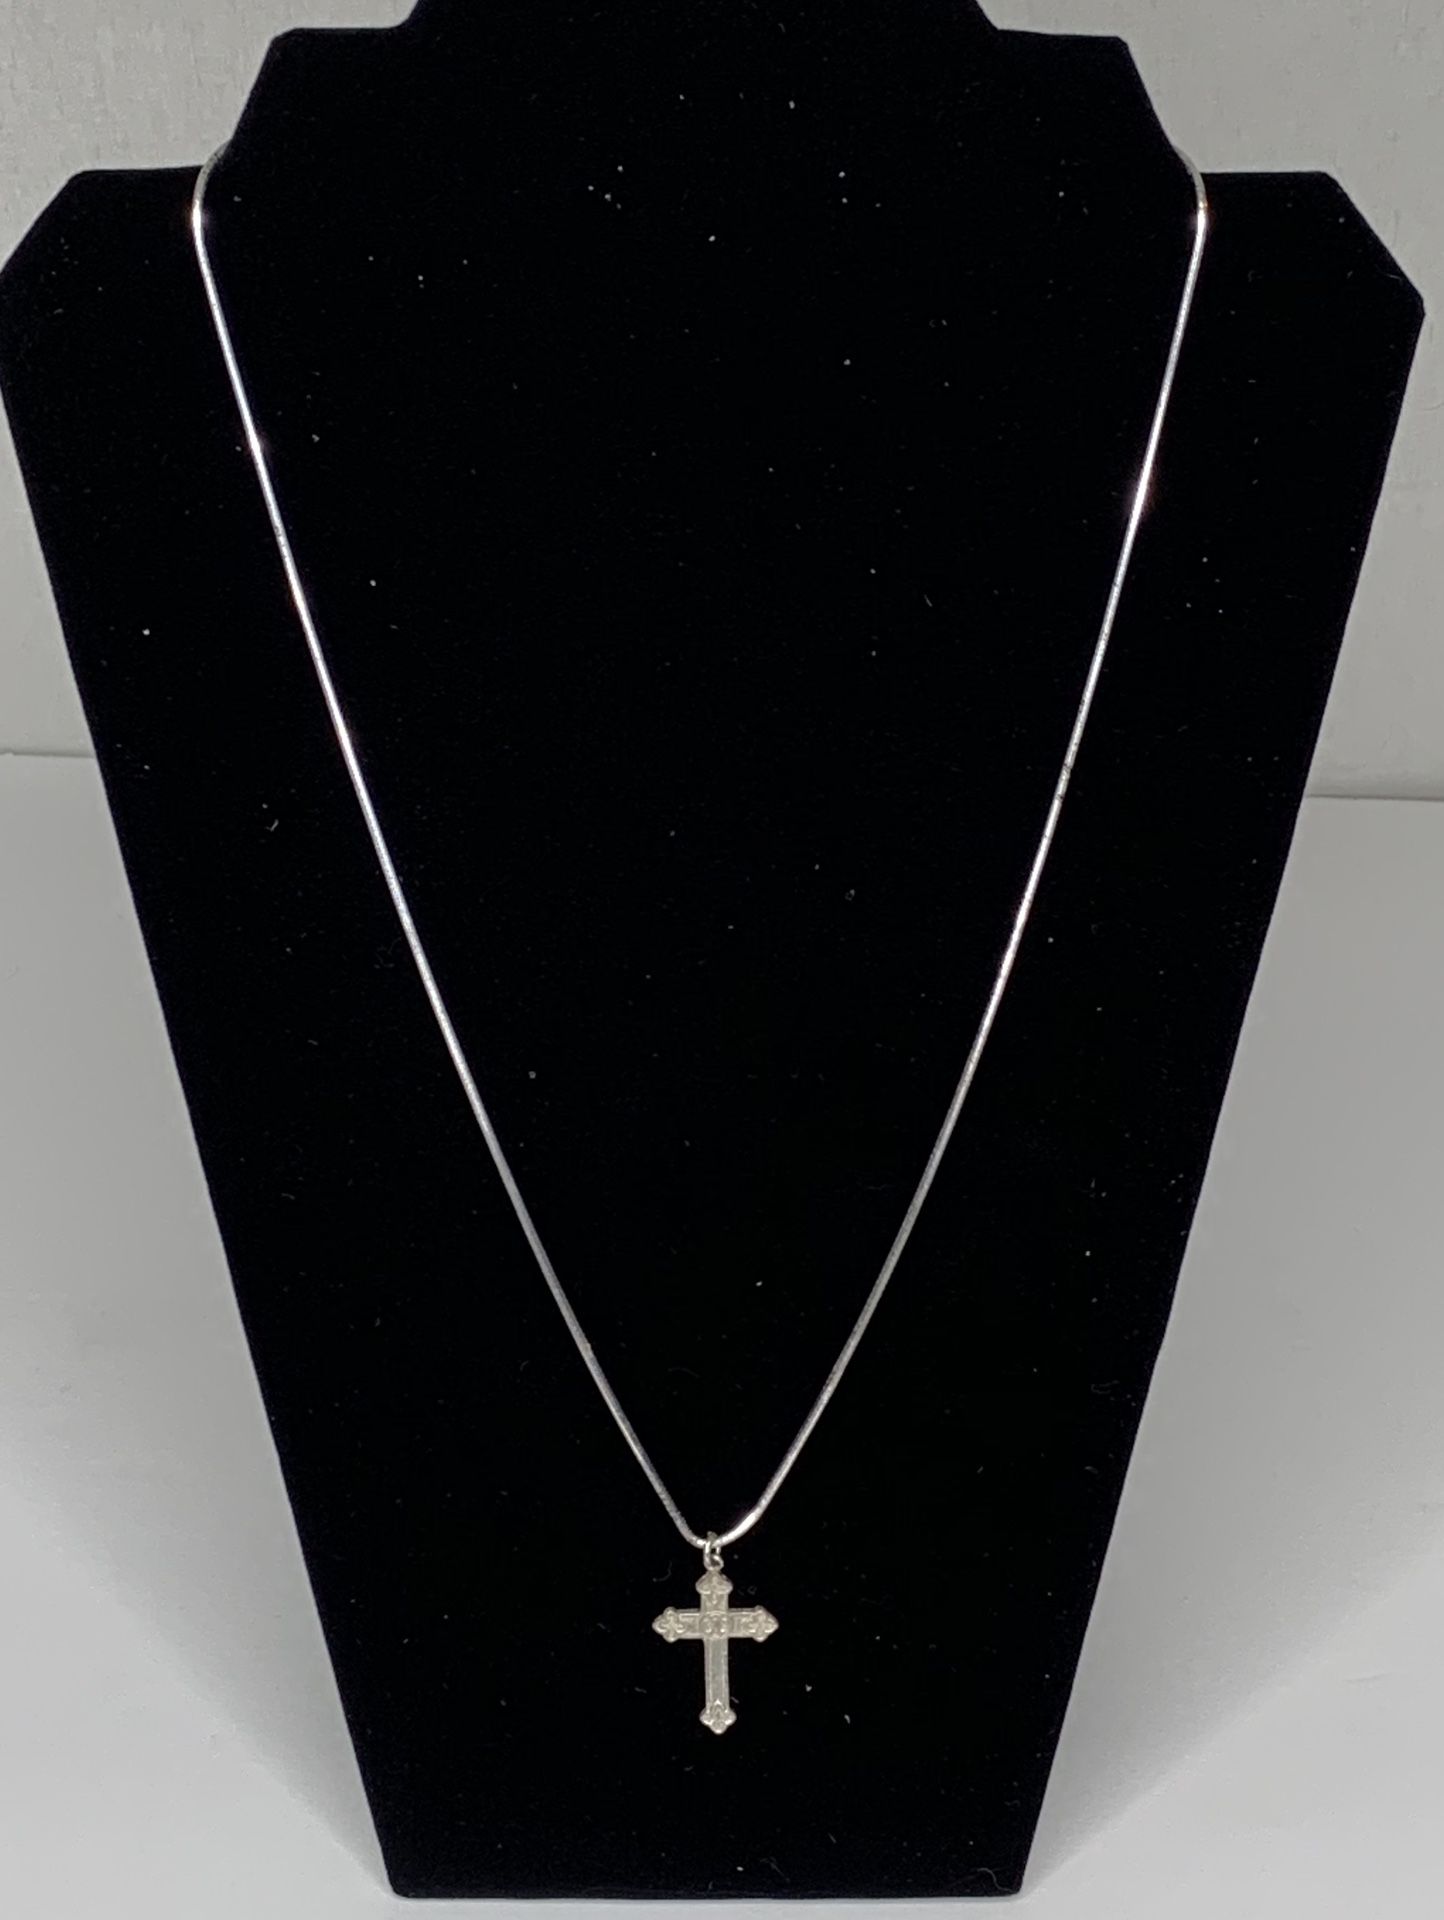 24 Inch 925 Sterling Silver Snake Chain w/Sterling Silver Cross Necklace